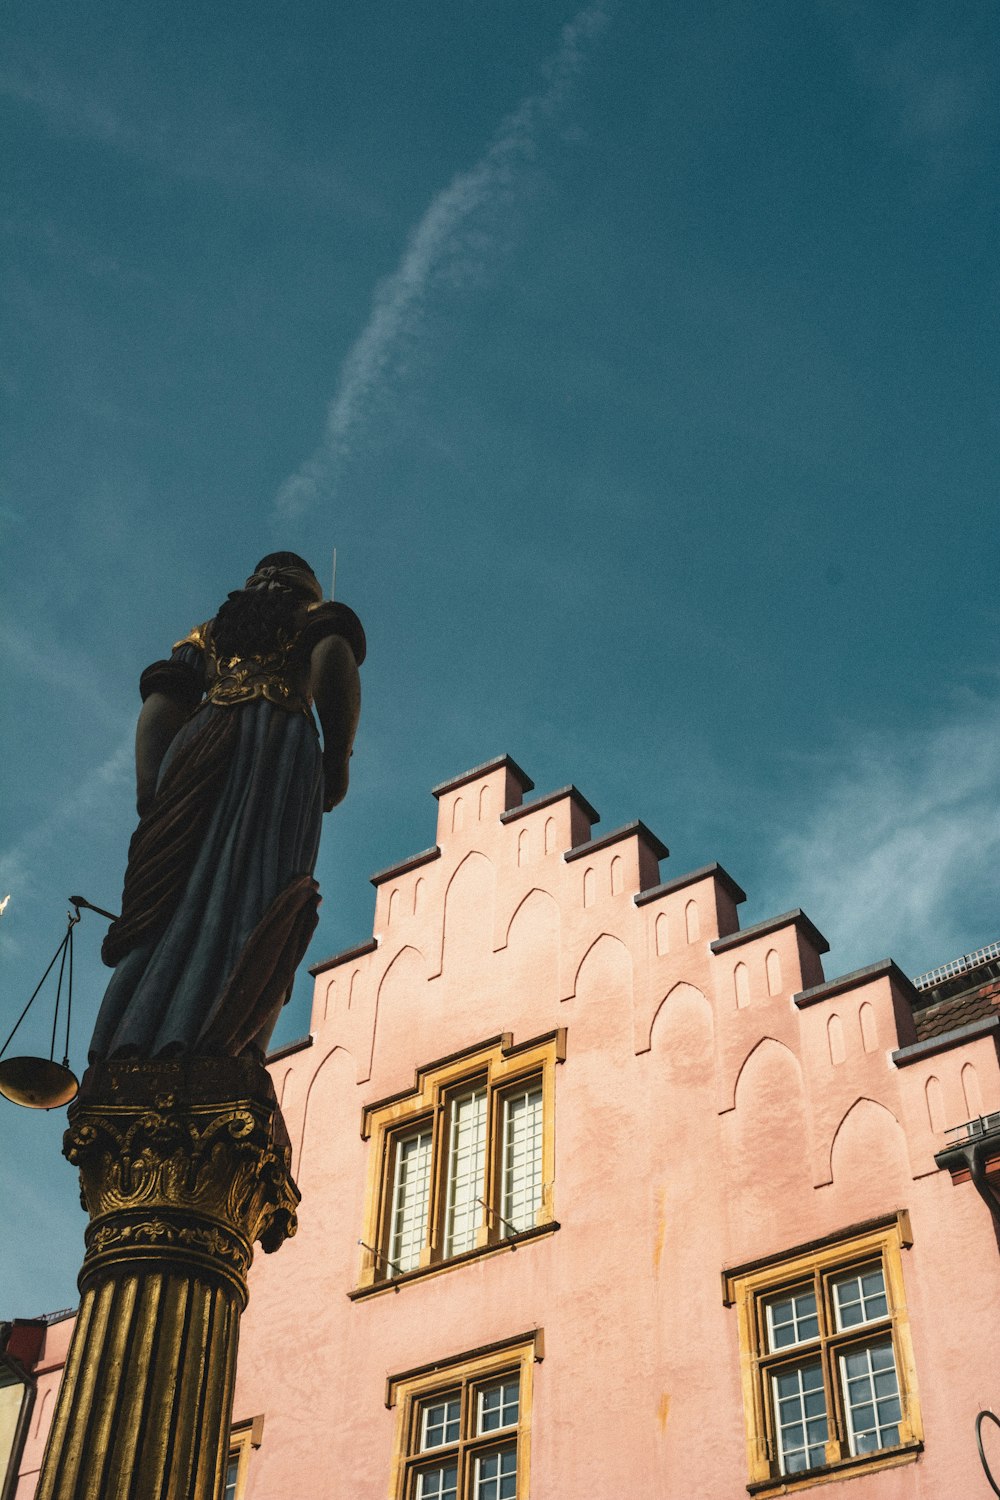 a statue of a lady holding a scale in front of a building